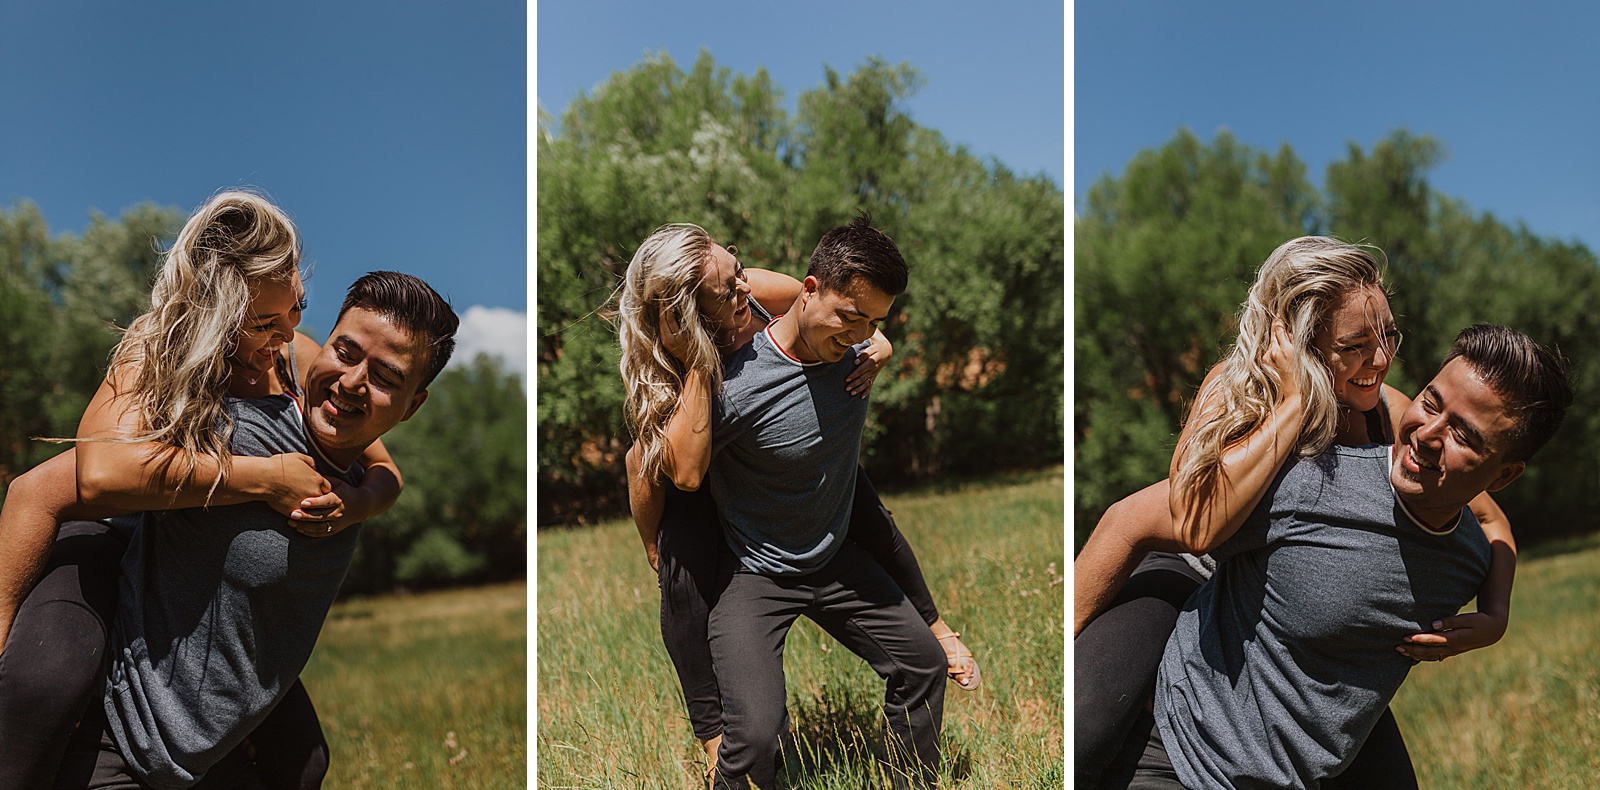 Laid back Colorado Springs engagement photos by Caitlyn Cloud Photography